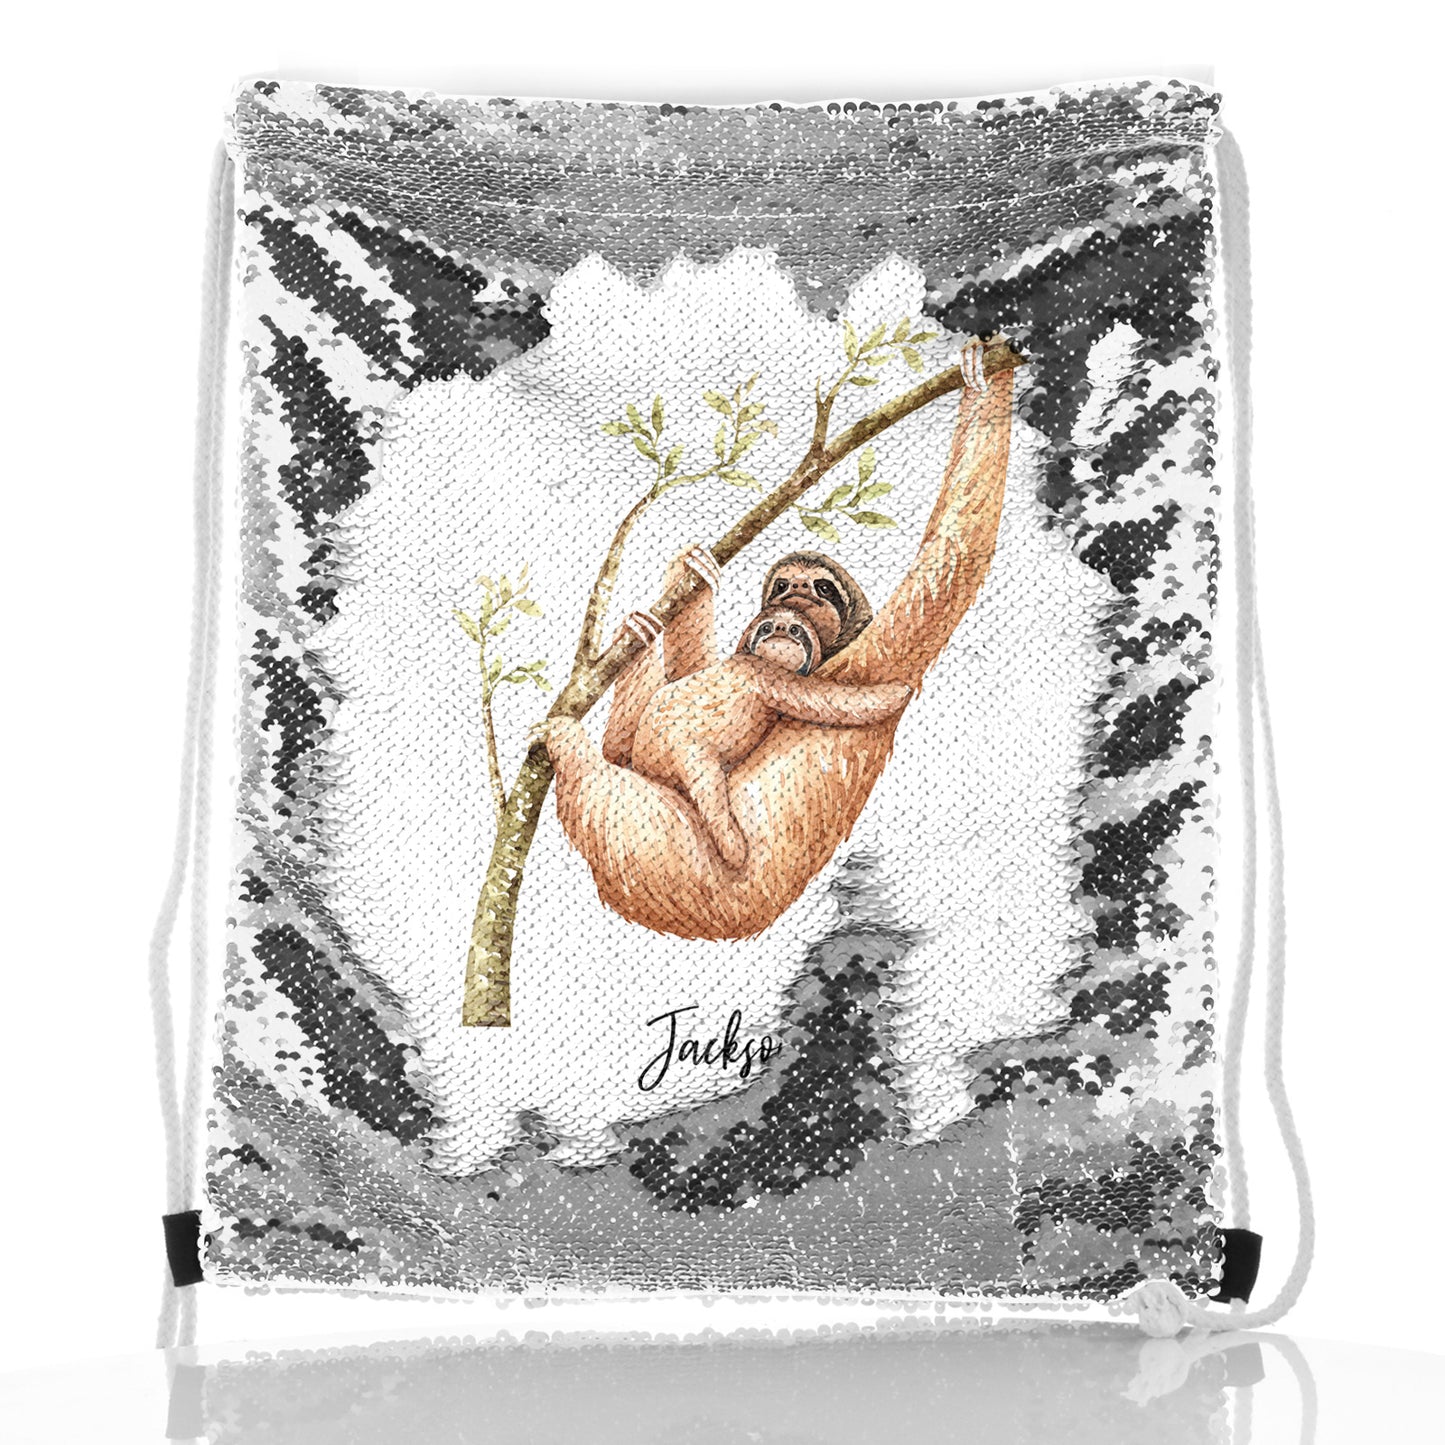 Personalised Sequin Drawstring Backpack with Welcoming Text and Climbing Mum and Baby Sloths